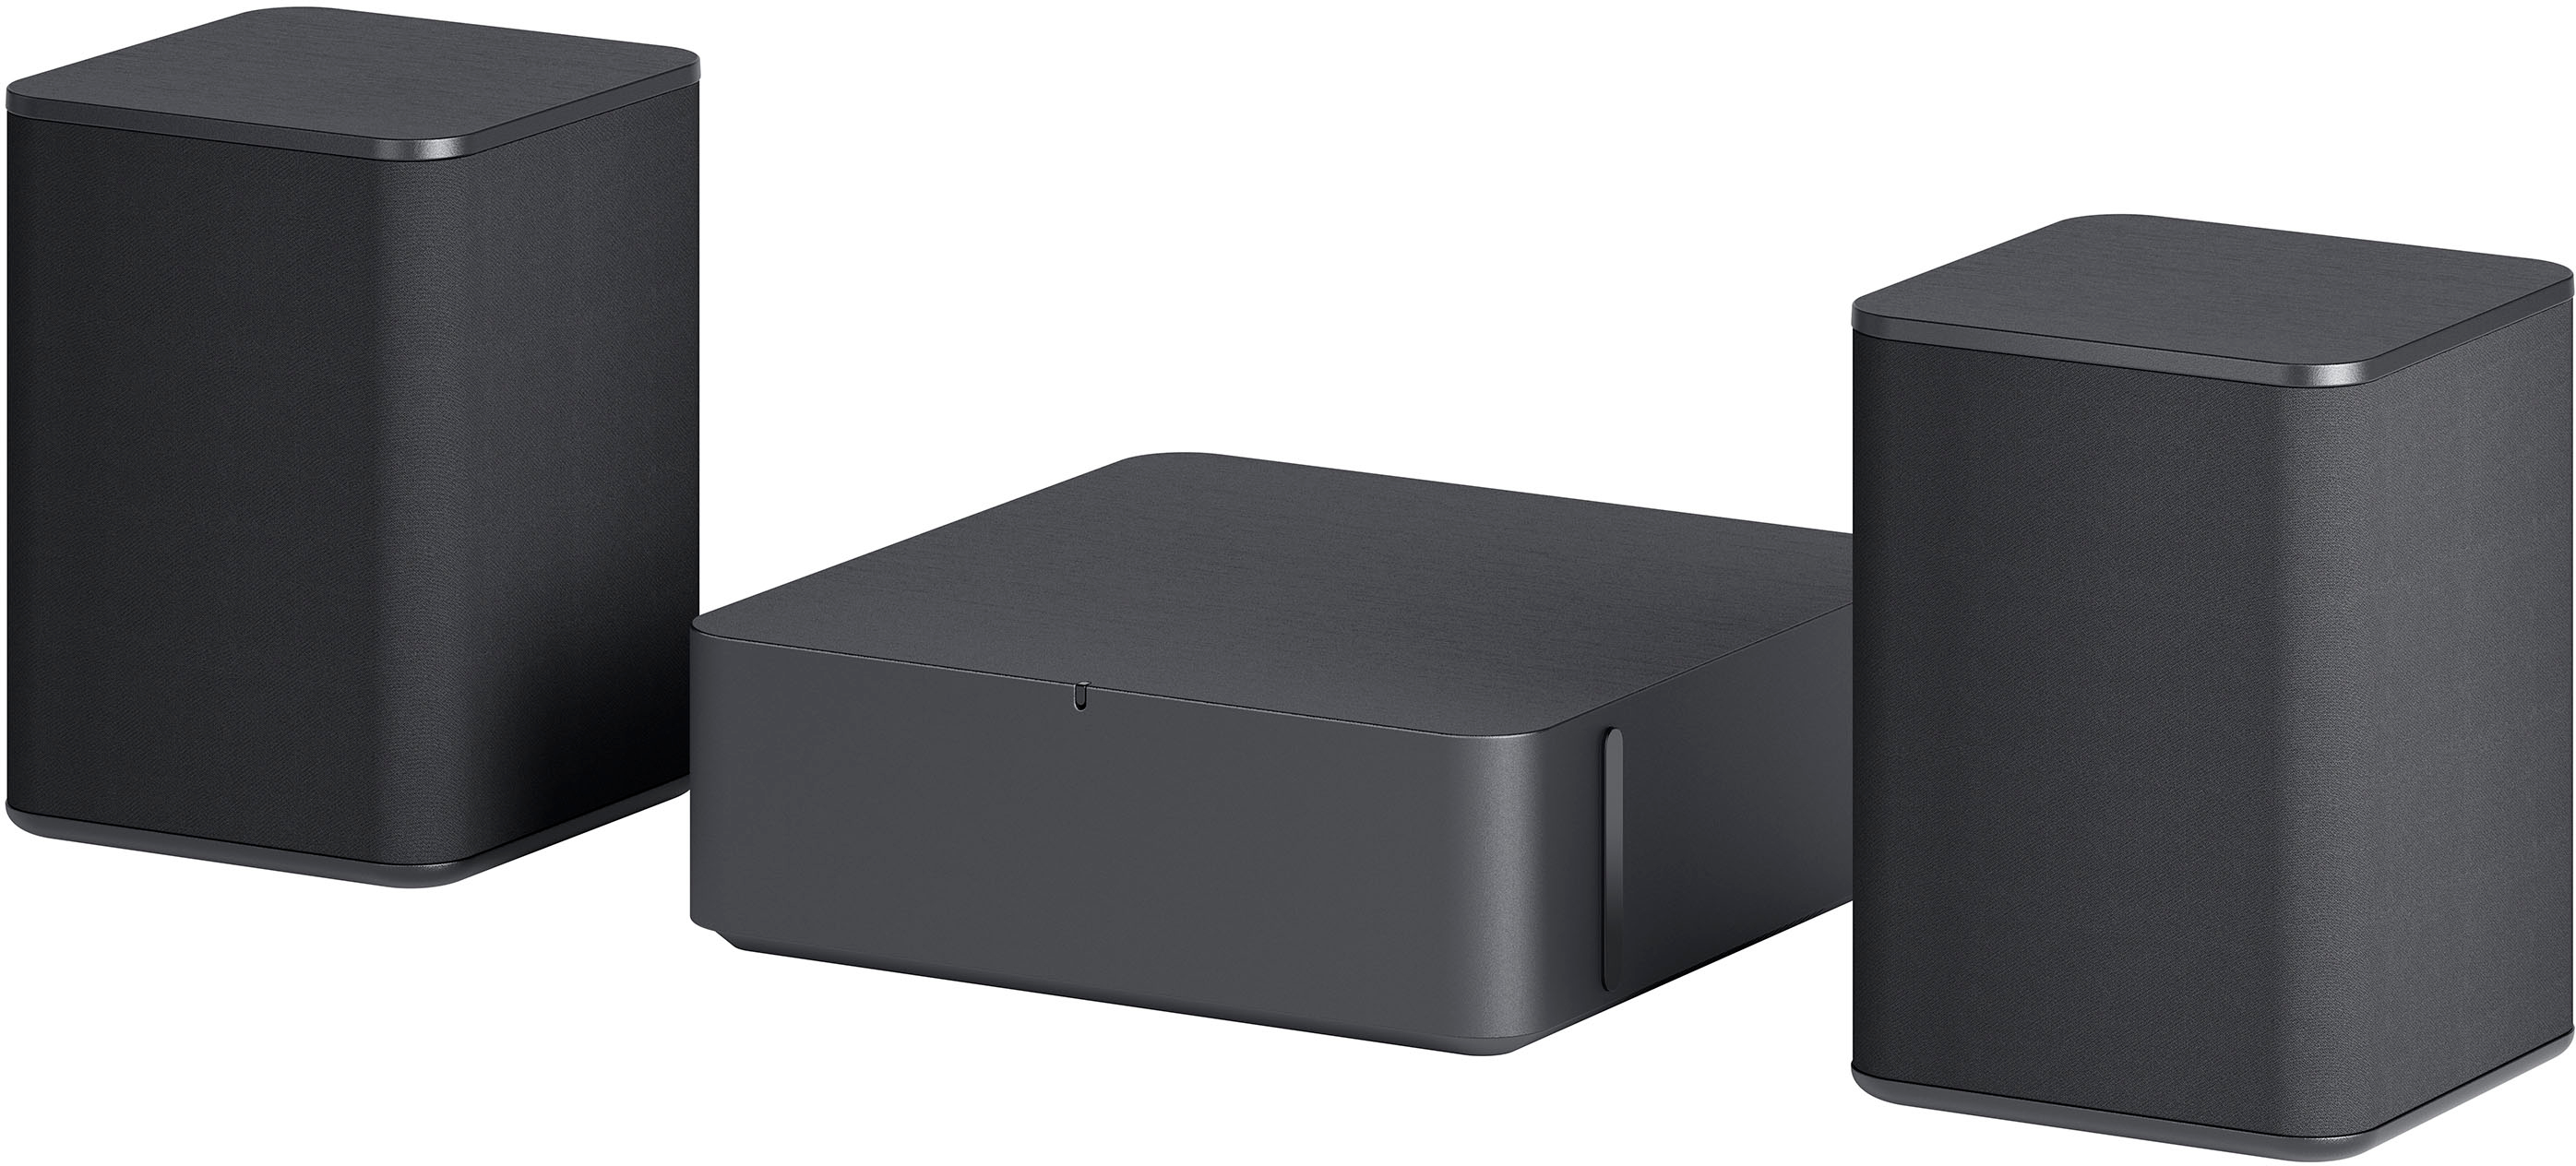 Back View: LG - 5.1.2 Channel Soundbar with Wireless Subwoofer, Dolby Atmos and DTS:X - Black